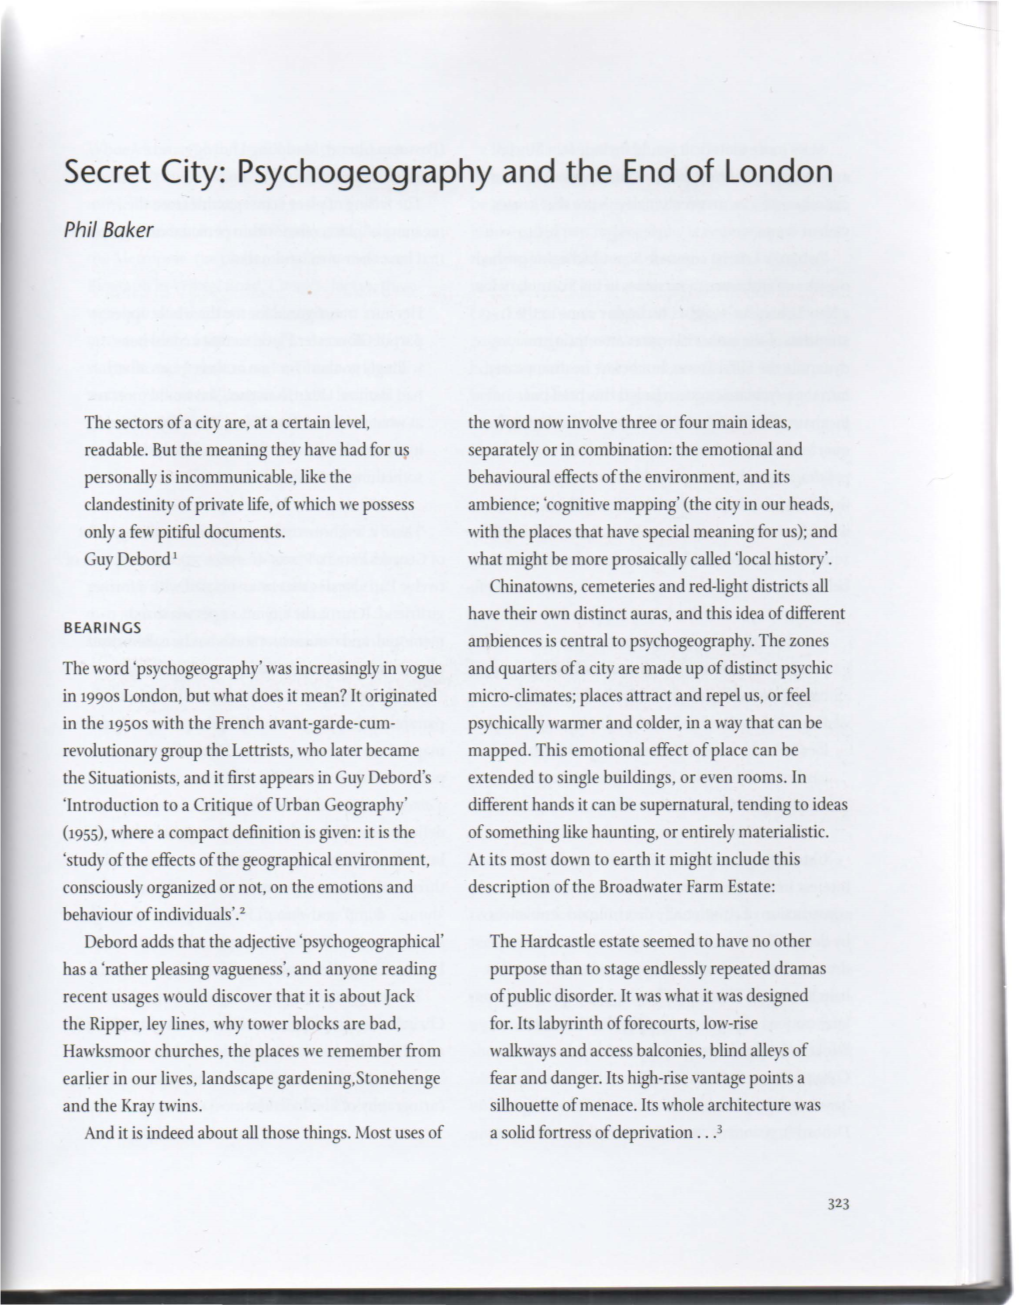 Secret City: Psychogeography and the End of London